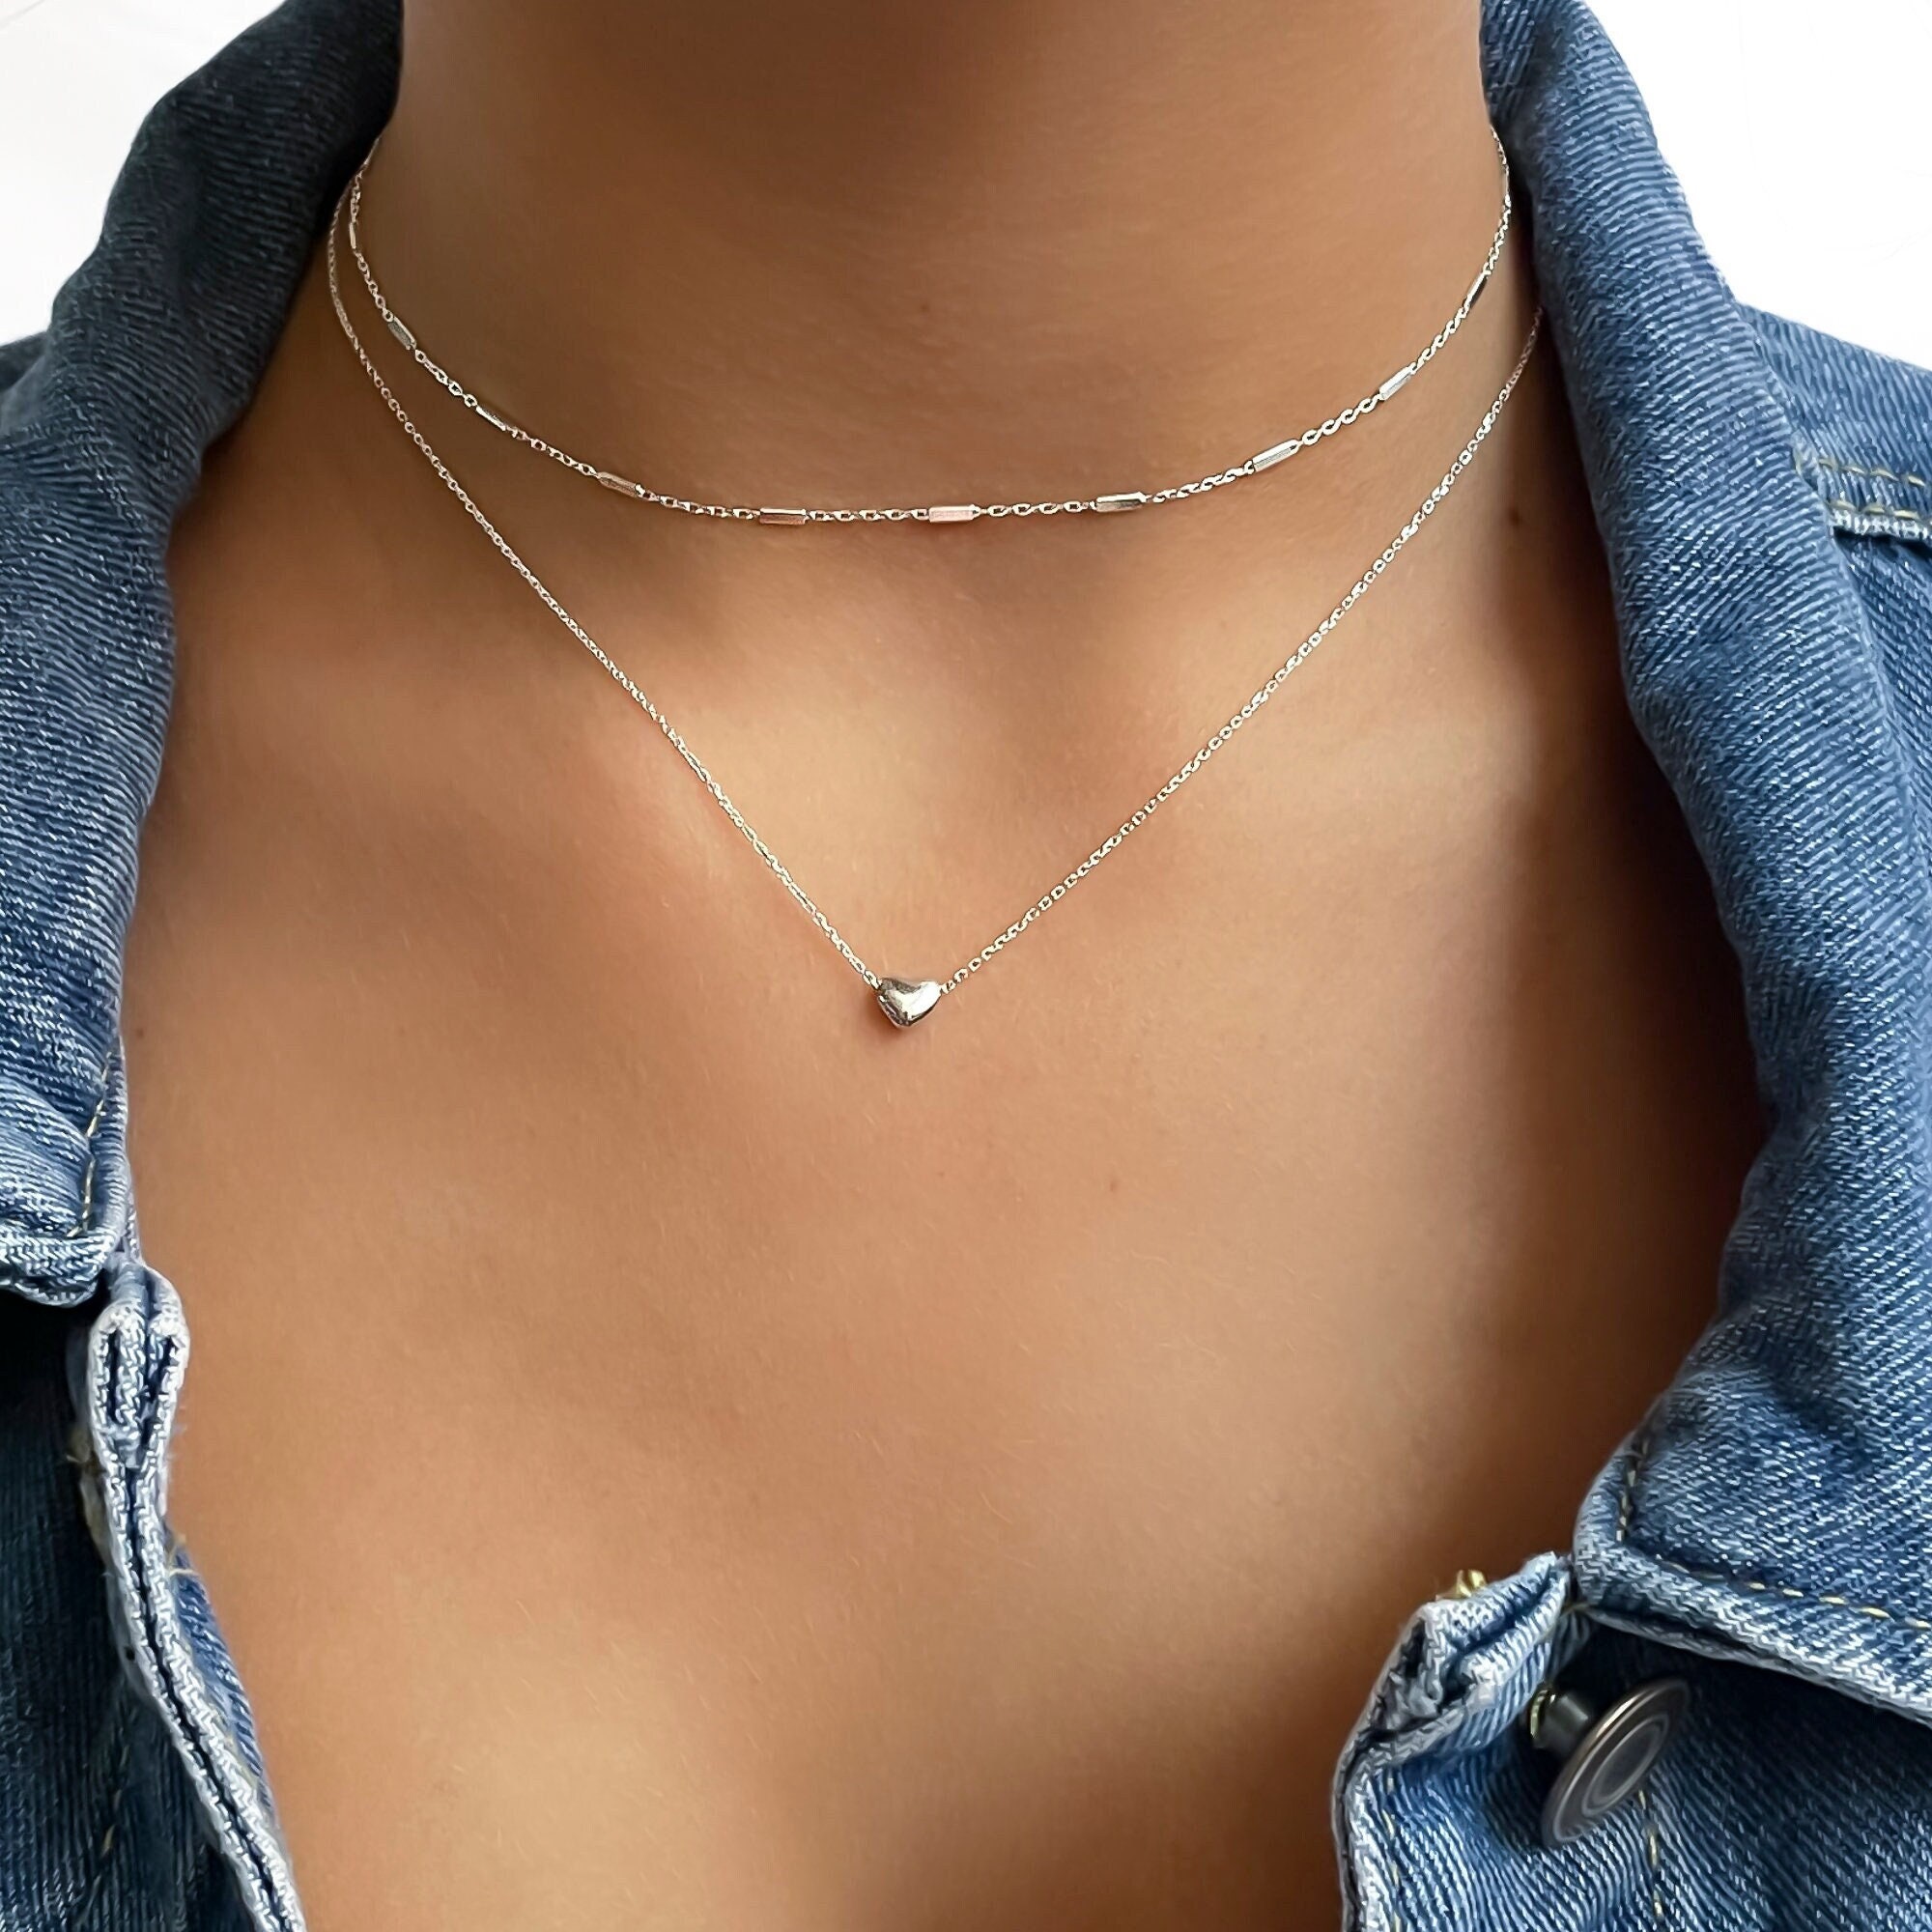 MONGAS Boho Layered Necklace Sterling Silver Triple 3 Stacked Vertical Bar Triangle Long Layering Necklaces Christmas Jewelry Gifts for Women